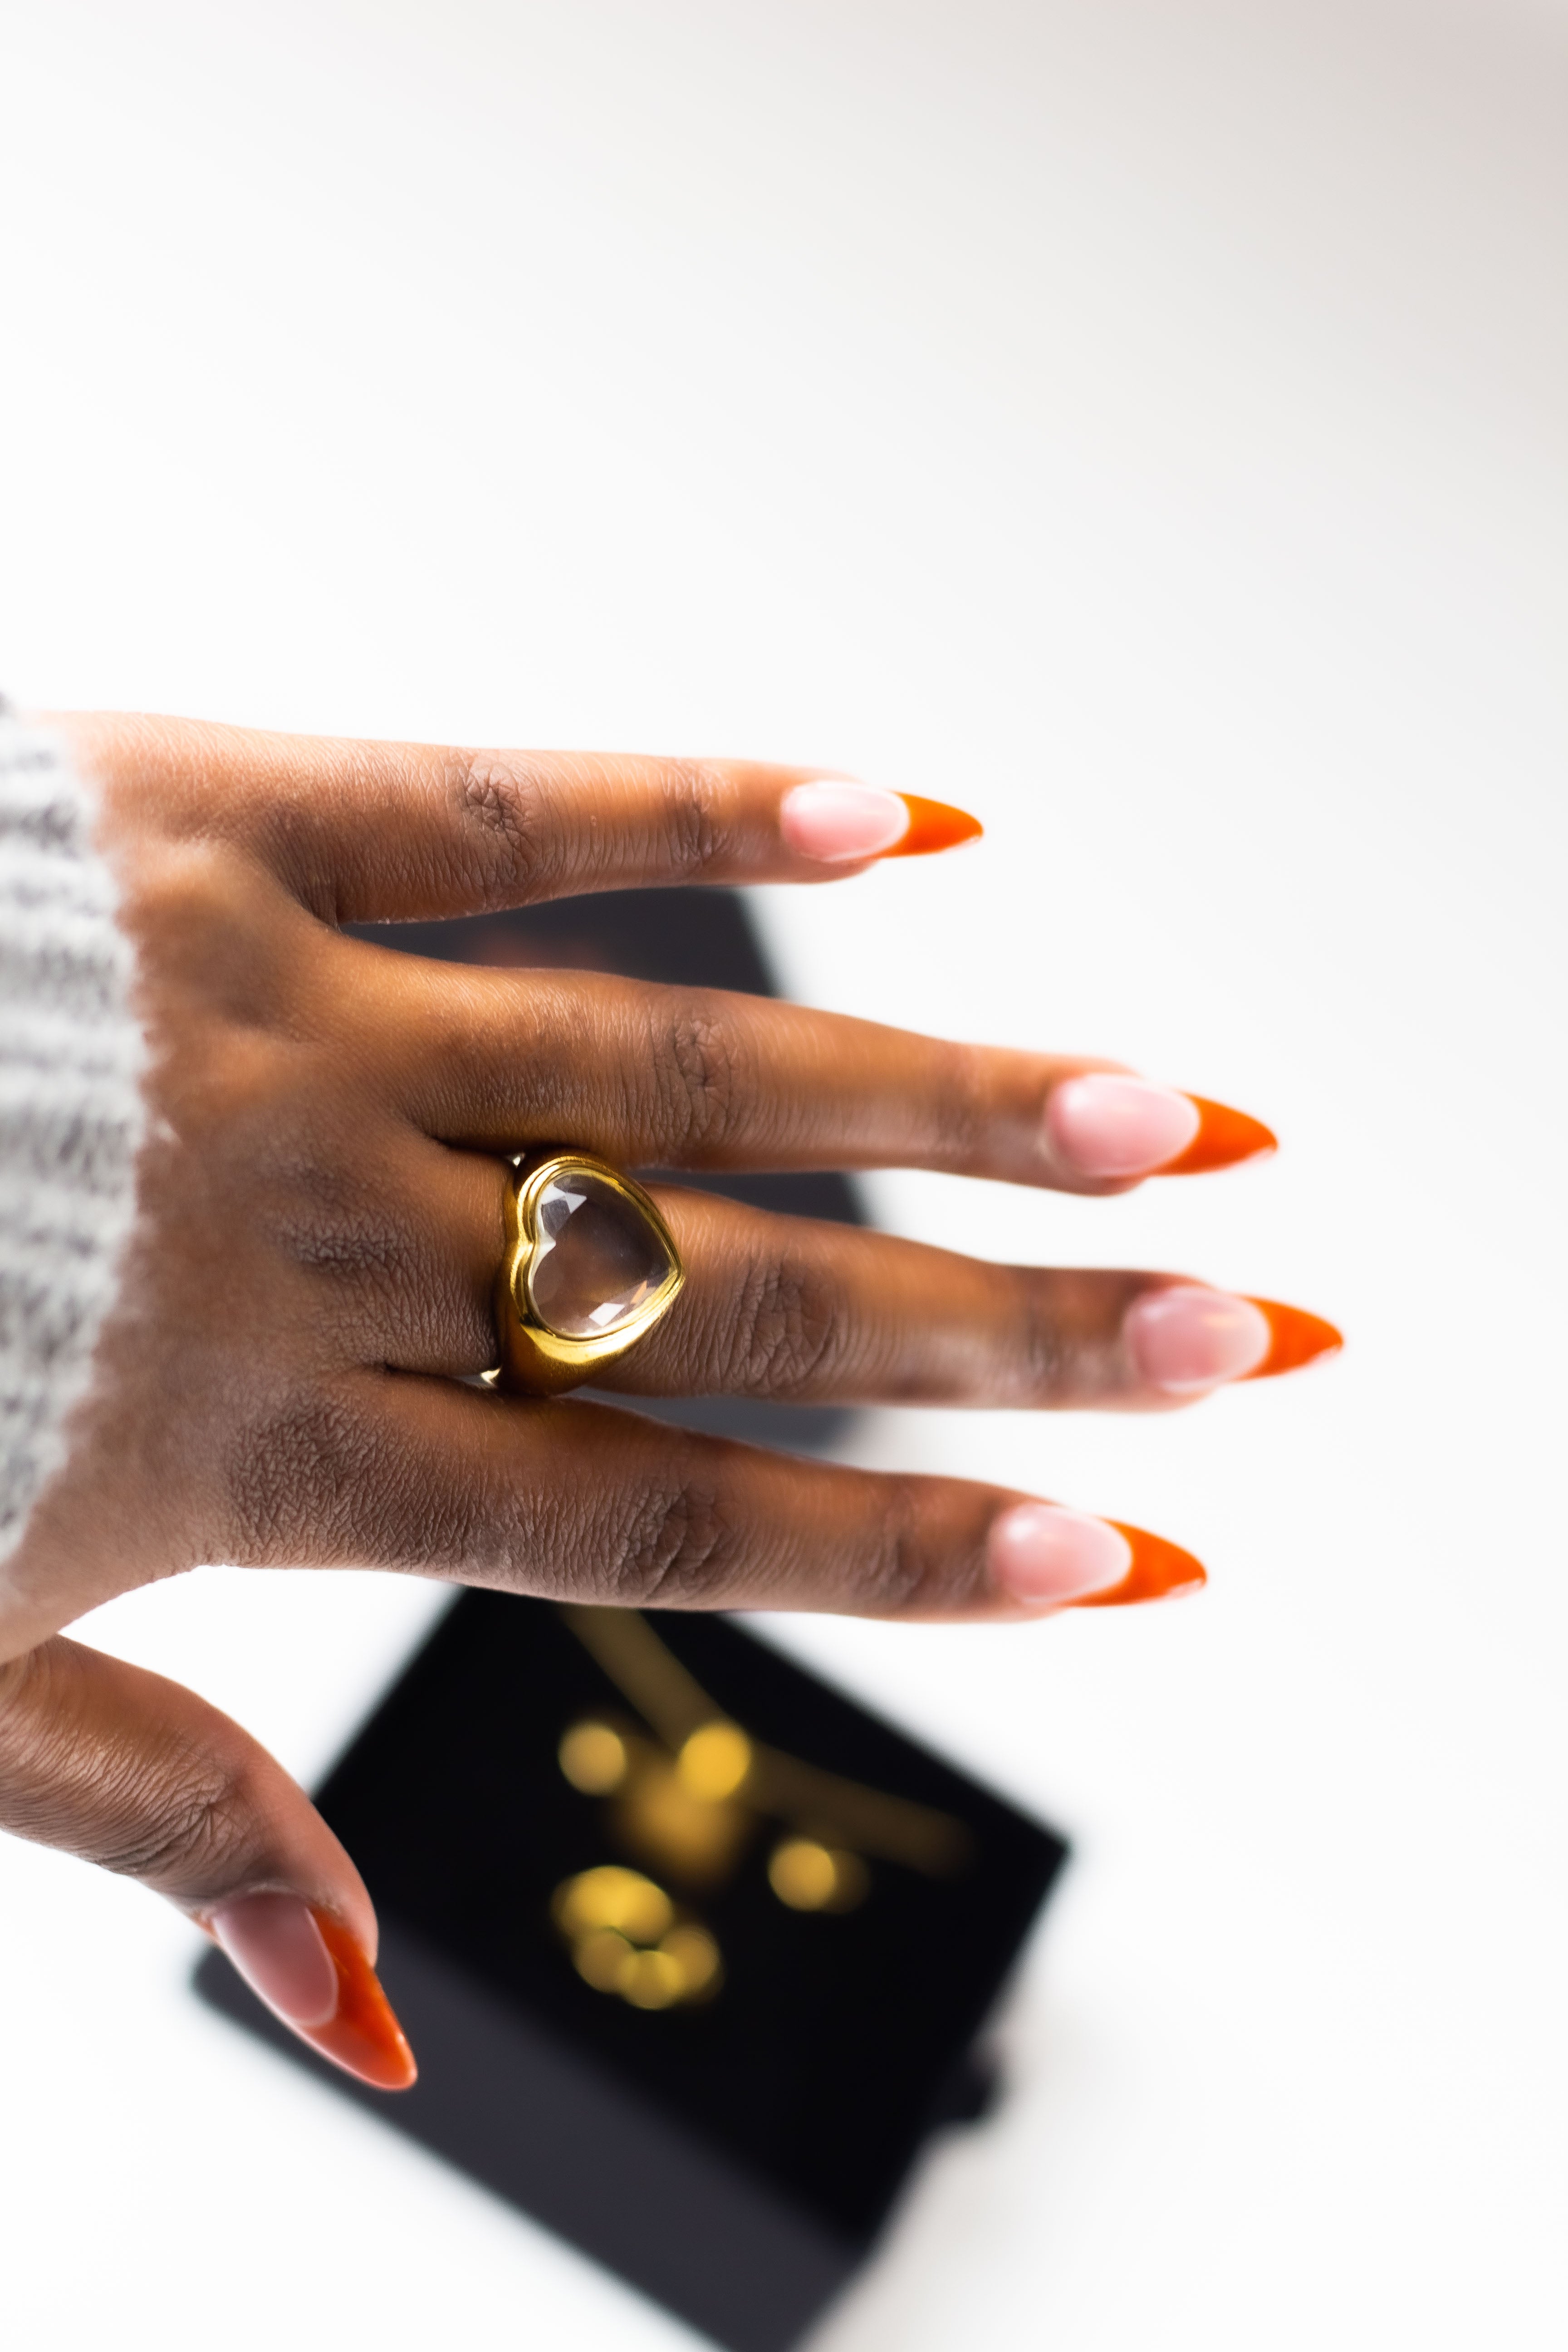 Model wearing an 18k gold ring with a heart shaped gem on the middle finger. Ella White Gemstone Ring by E's Element.